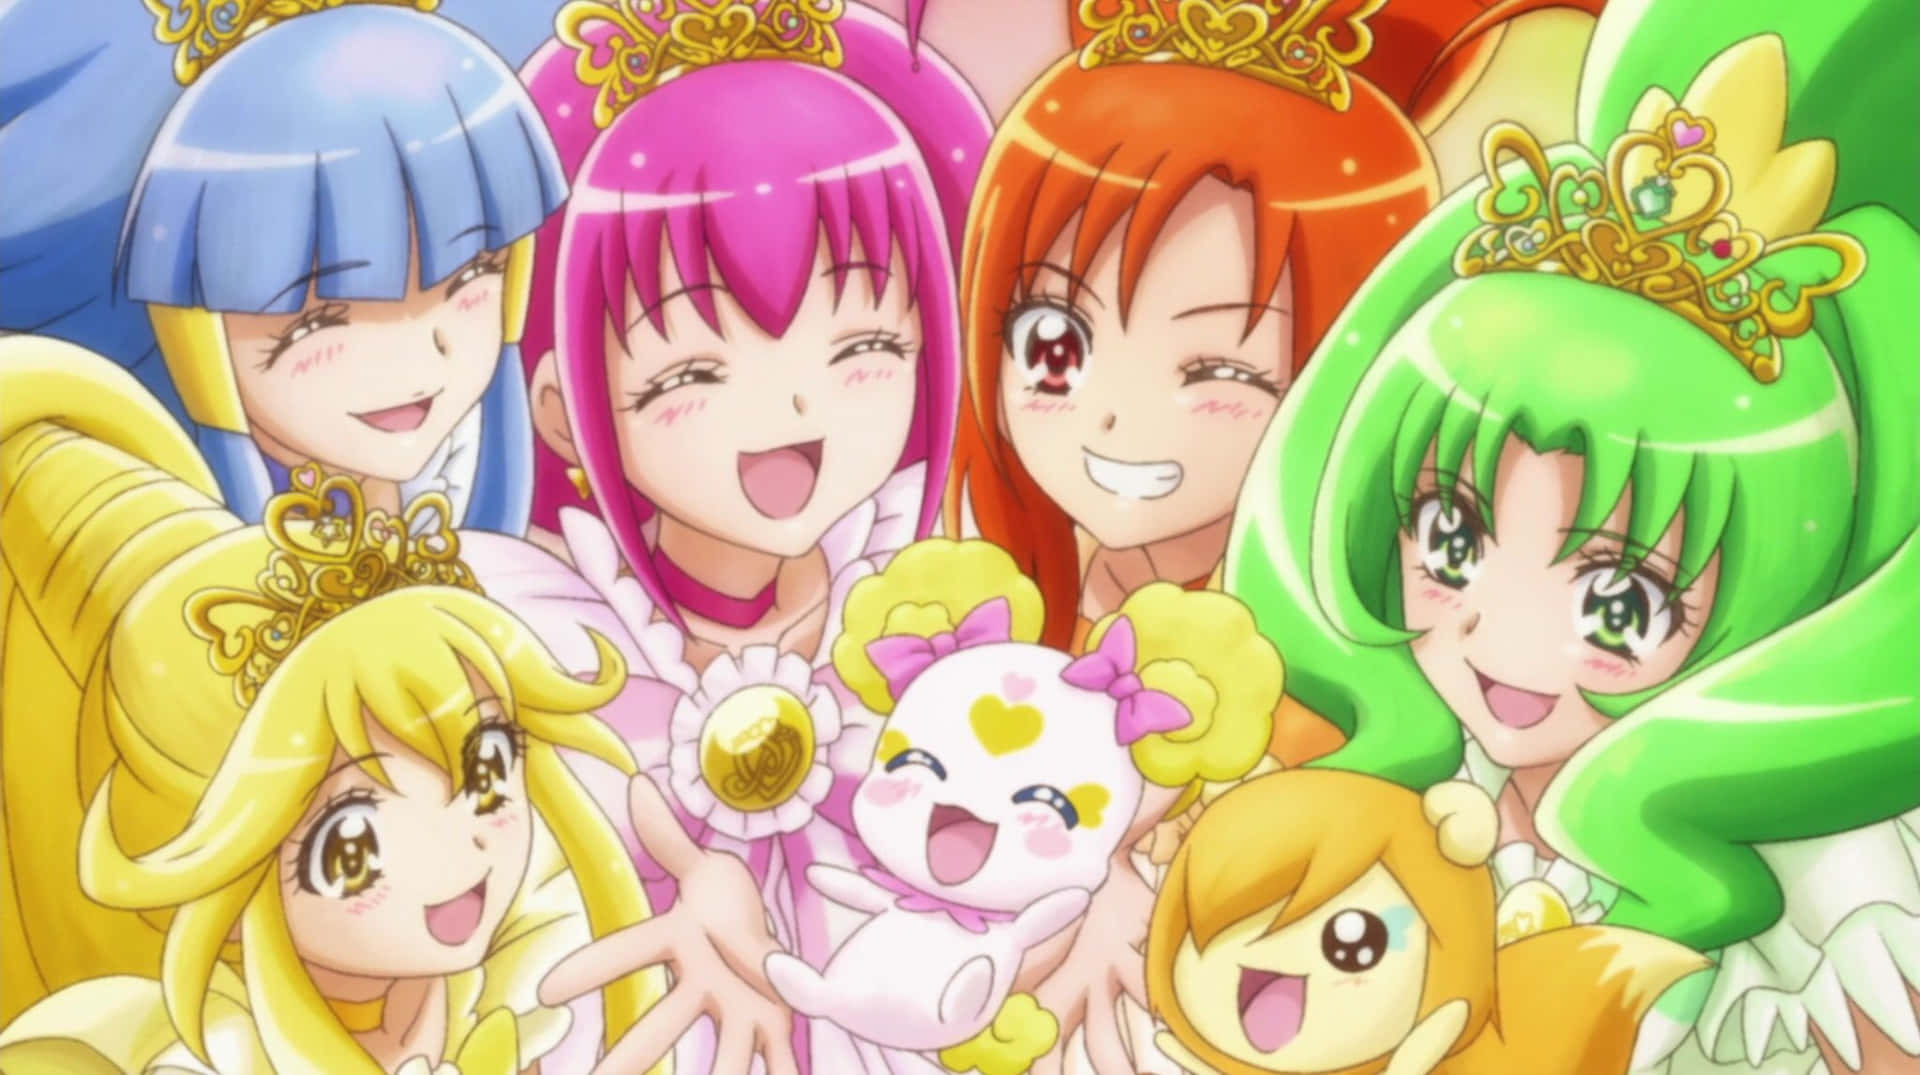 Welcome to the Glitter Force, the squad of magical girls that protect the world from evil! Wallpaper